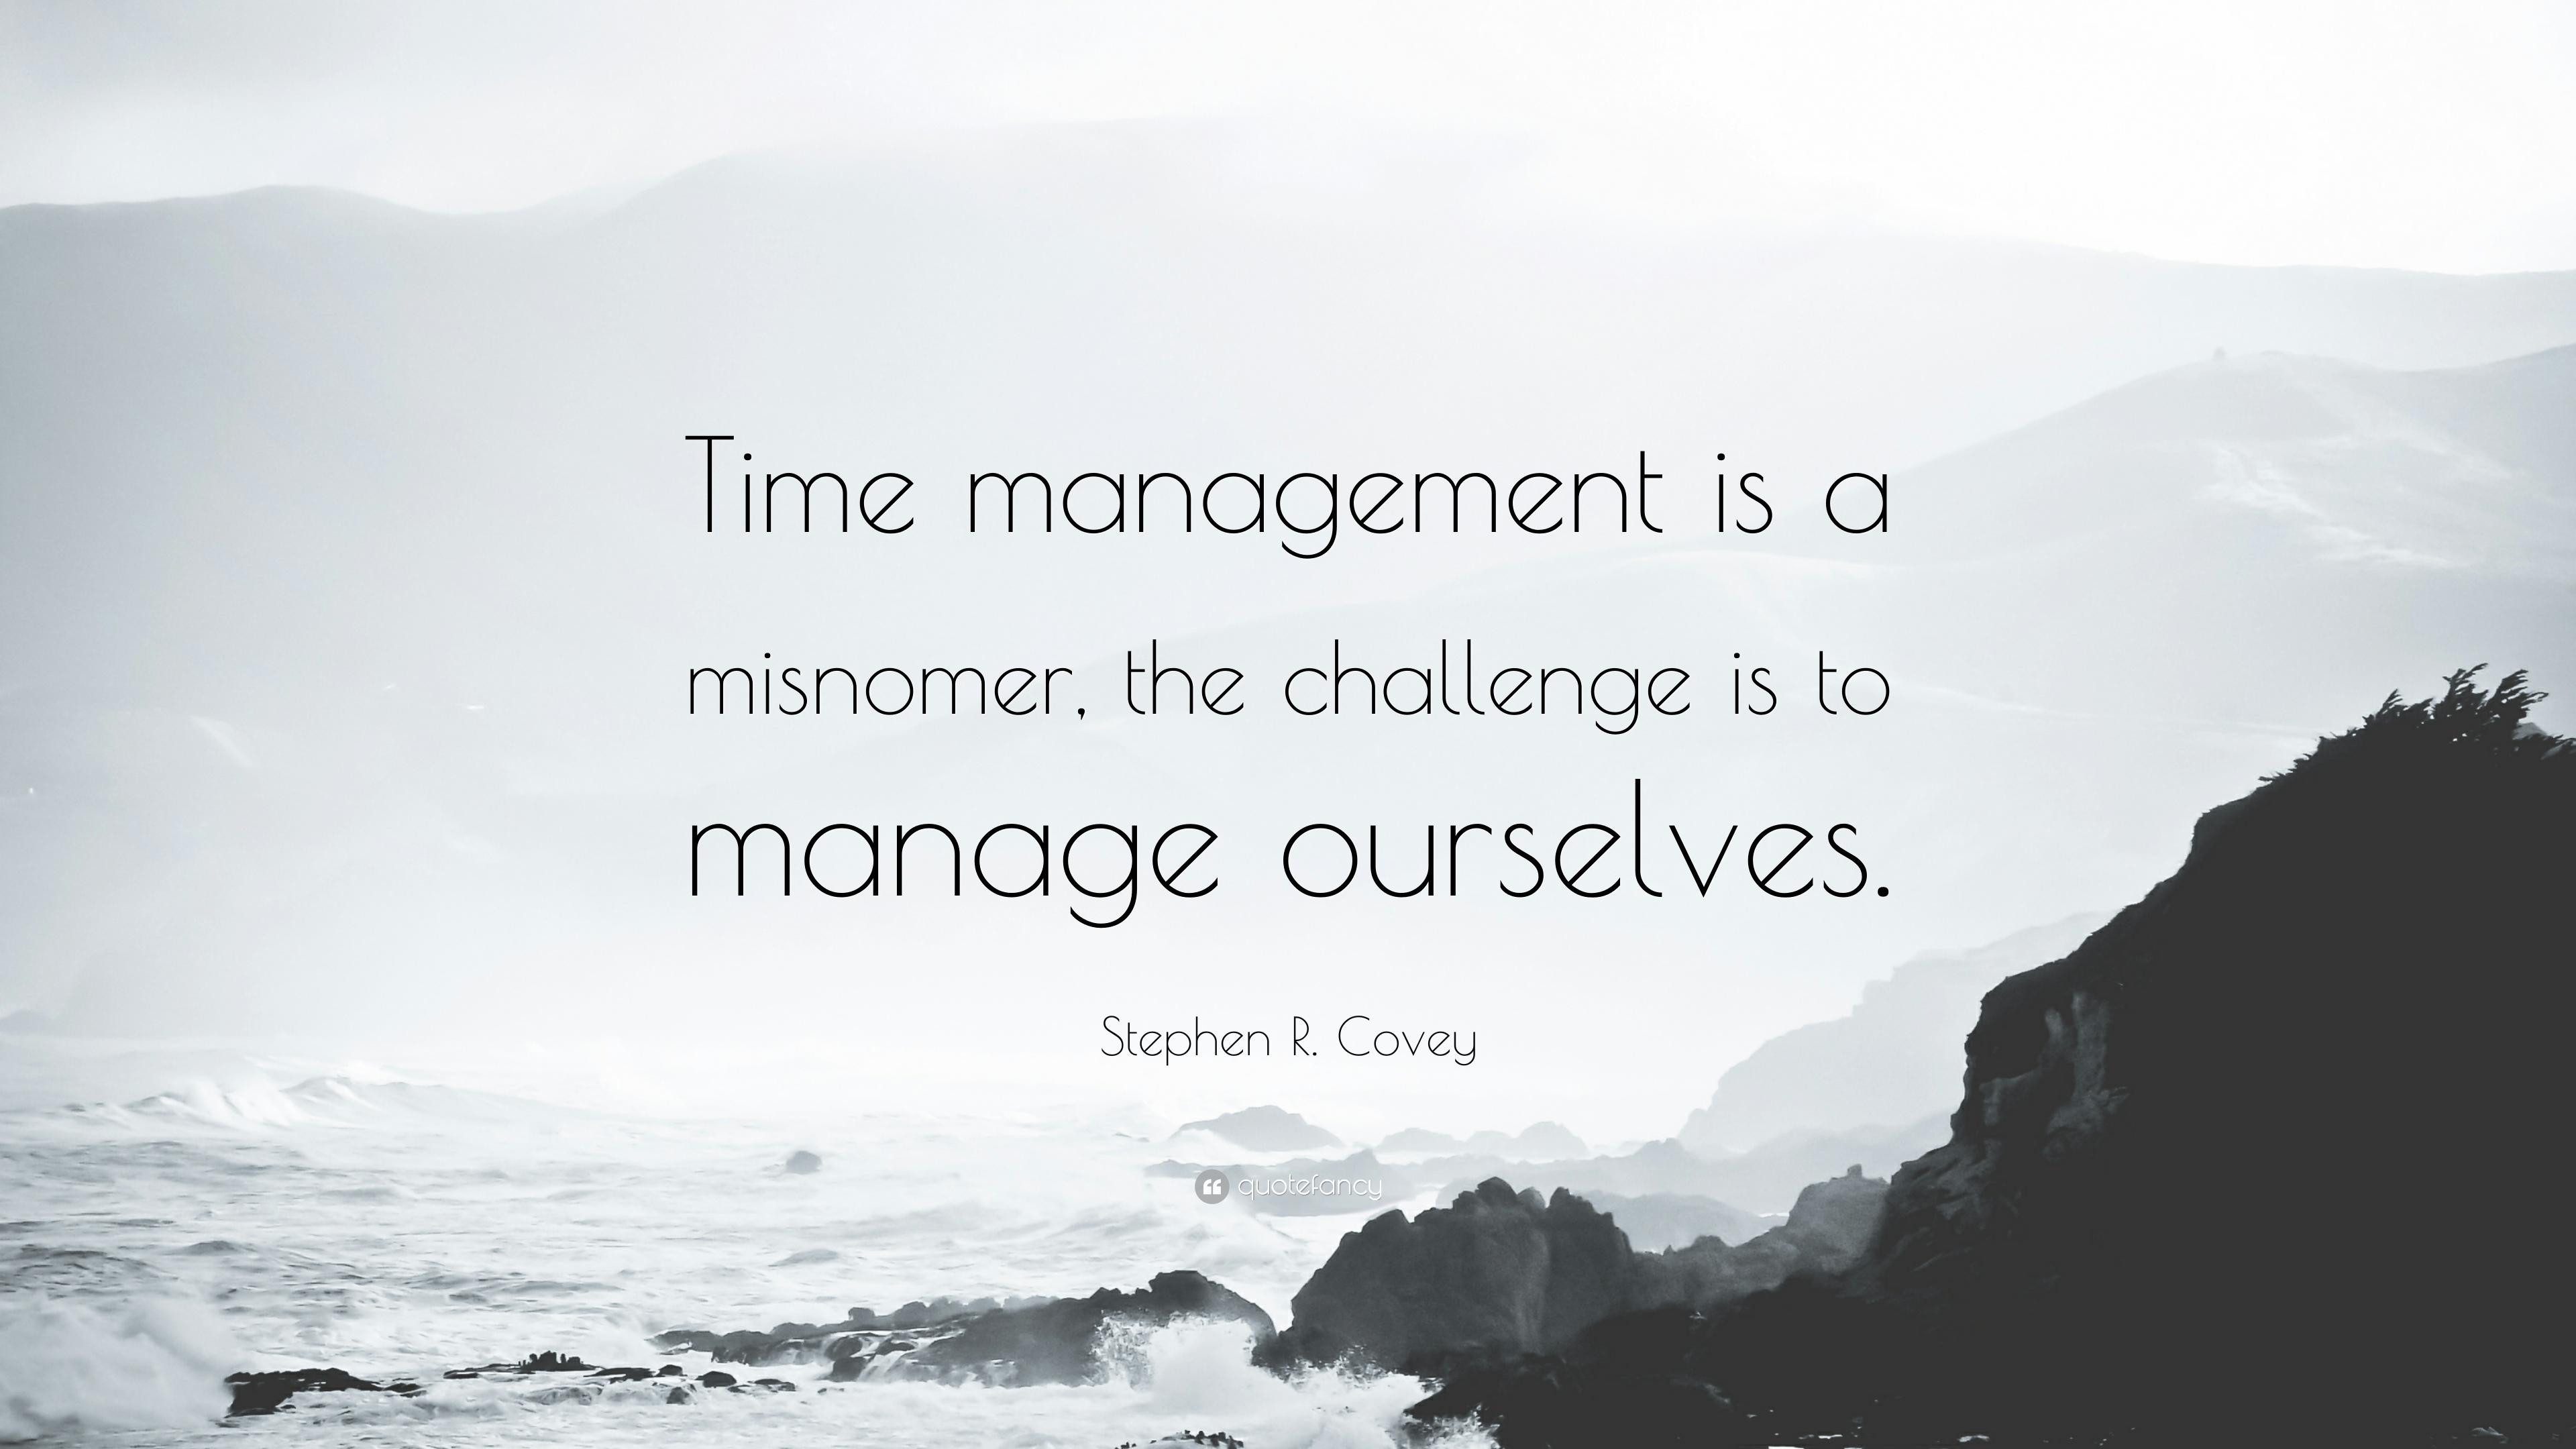 Stephen R. Covey Quote: “Time management is a misnomer